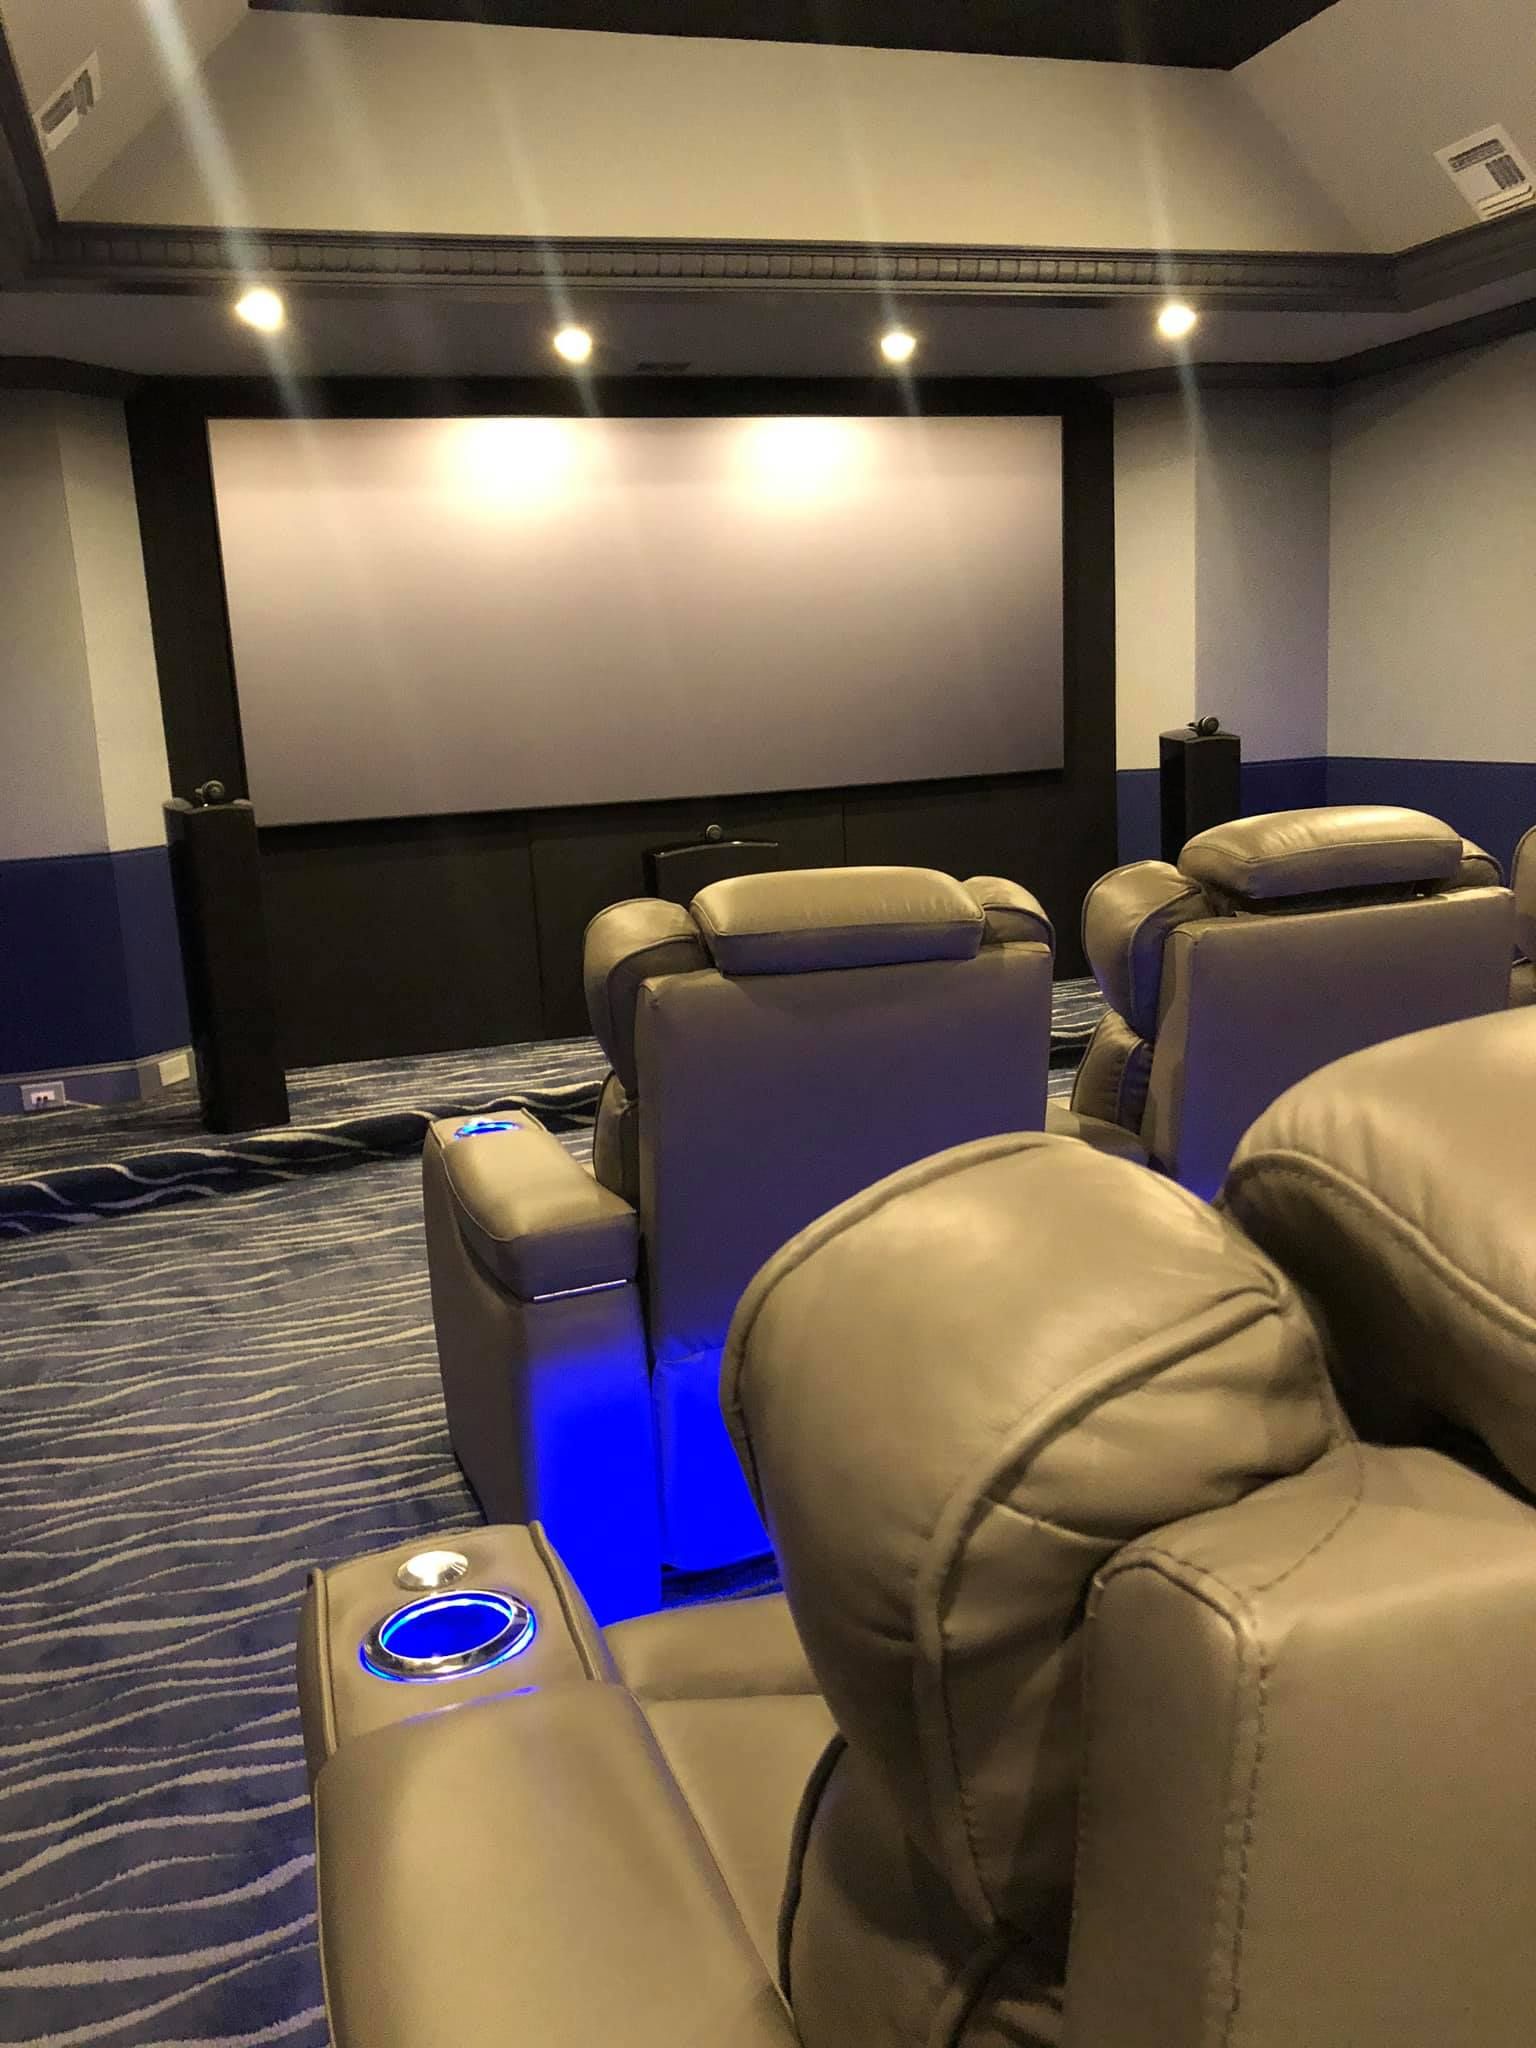 TV and Home Theater for Wired Up 361 in Corpus Christi, TX